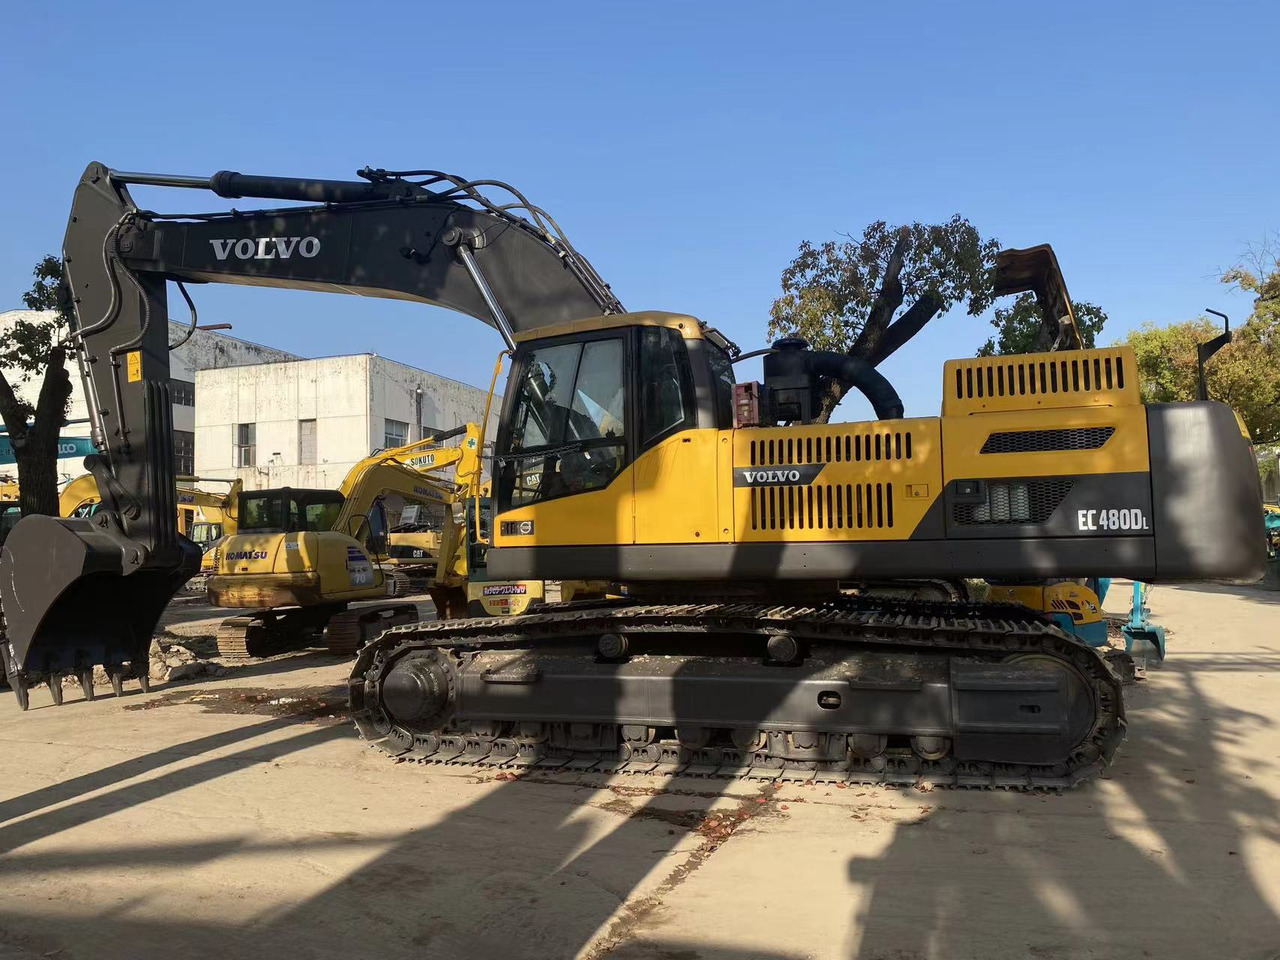 Hot selling original made Used excavator VOLVO EC480DL in stock low price for sale lizingą Hot selling original made Used excavator VOLVO EC480DL in stock low price for sale: foto 3